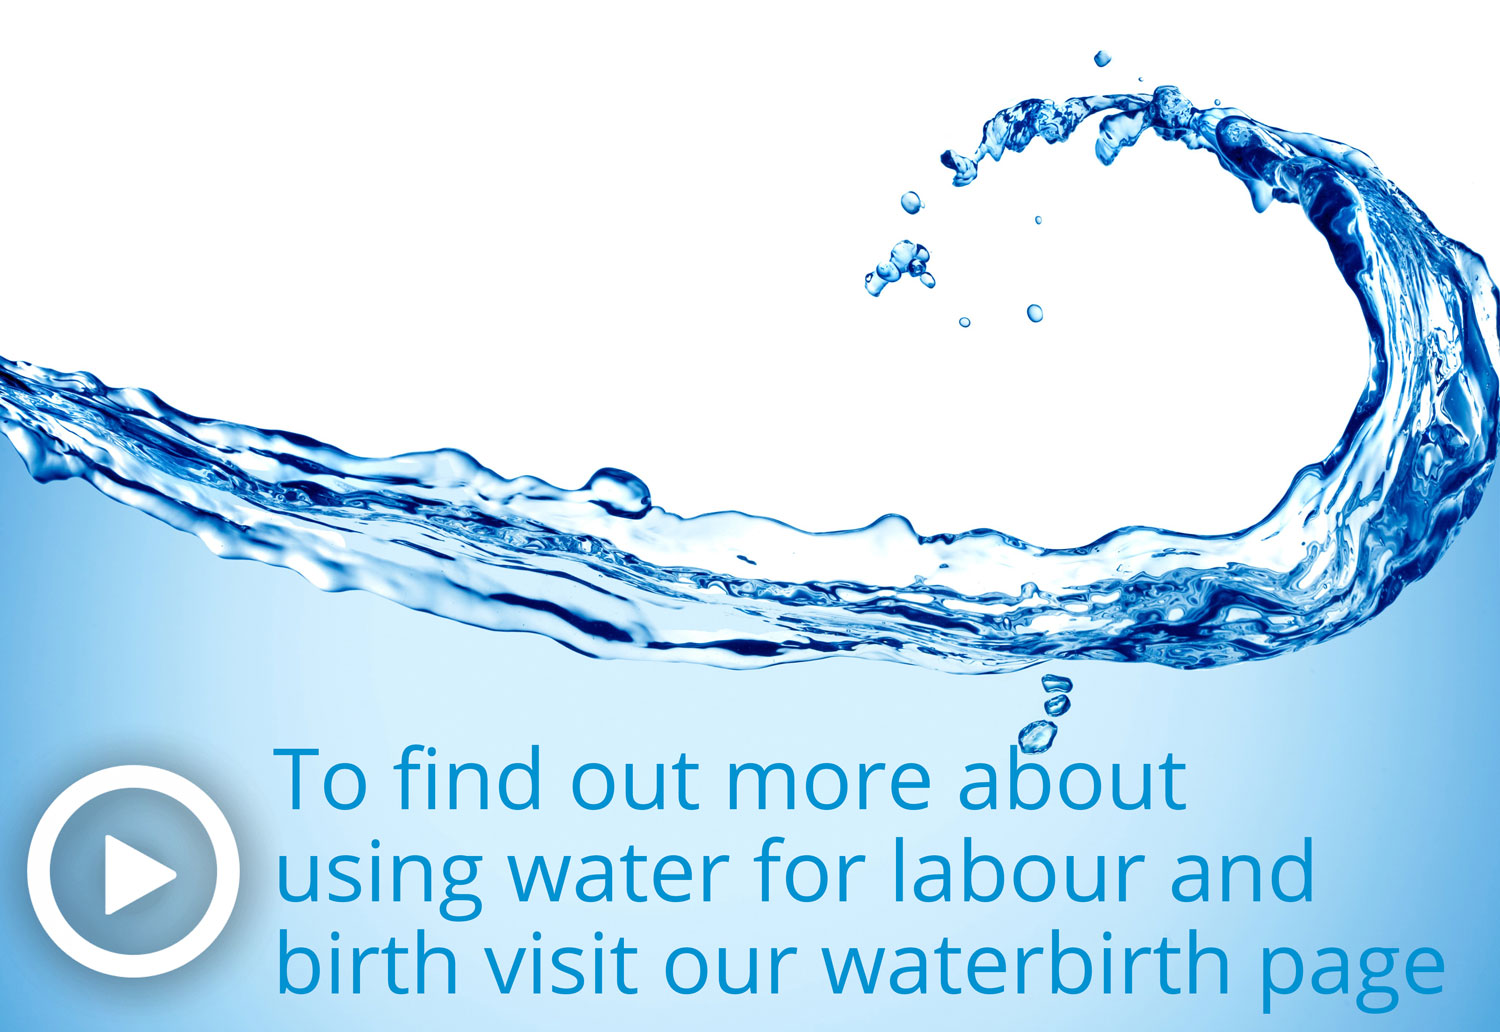 Find out more about waterbirth